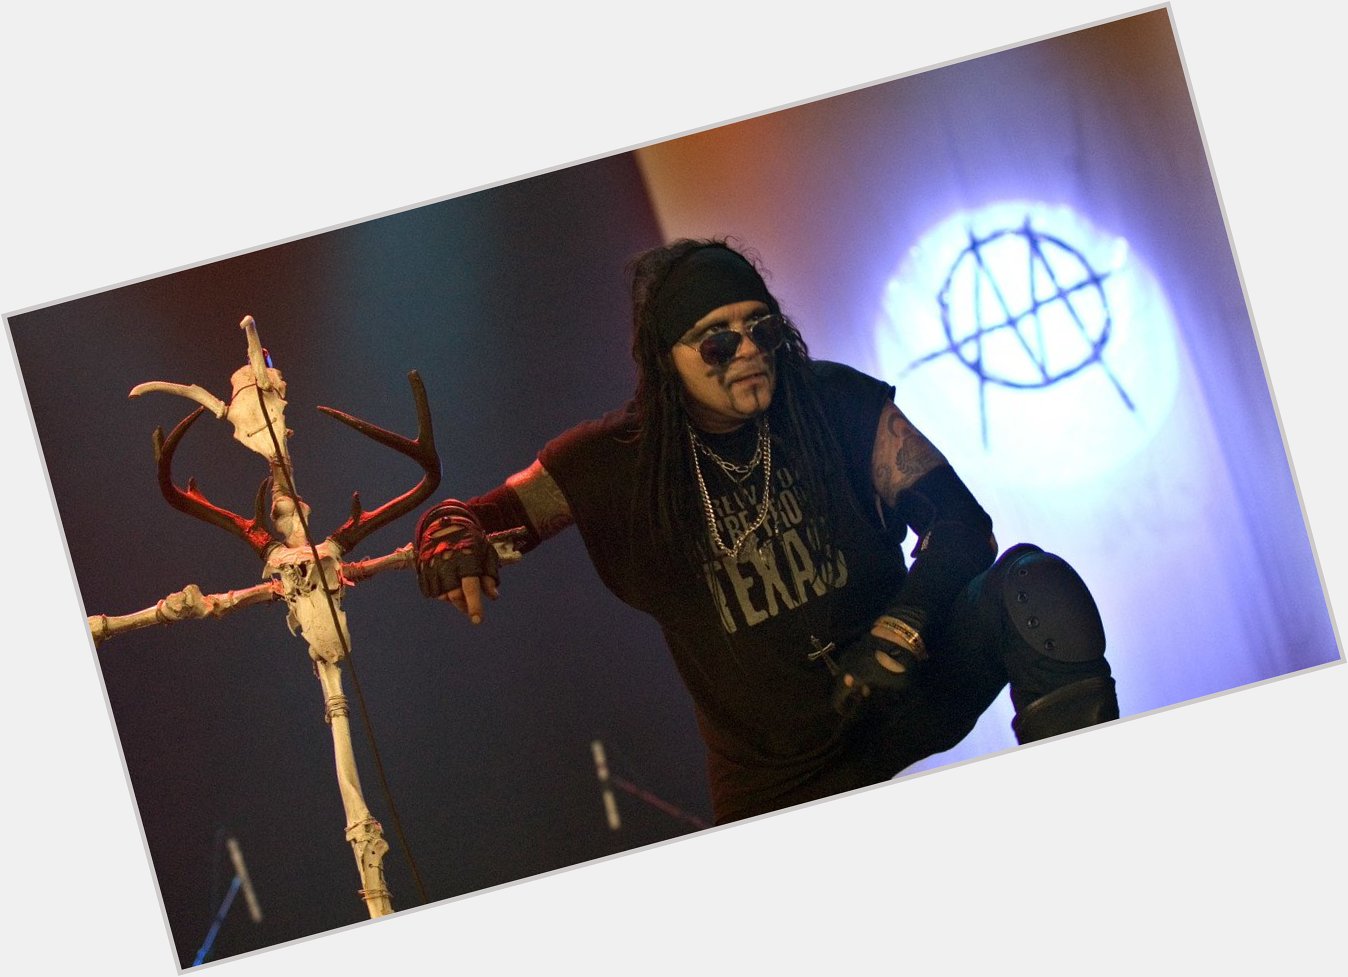 Happy Birthday to the one and only Al Jourgensen of 